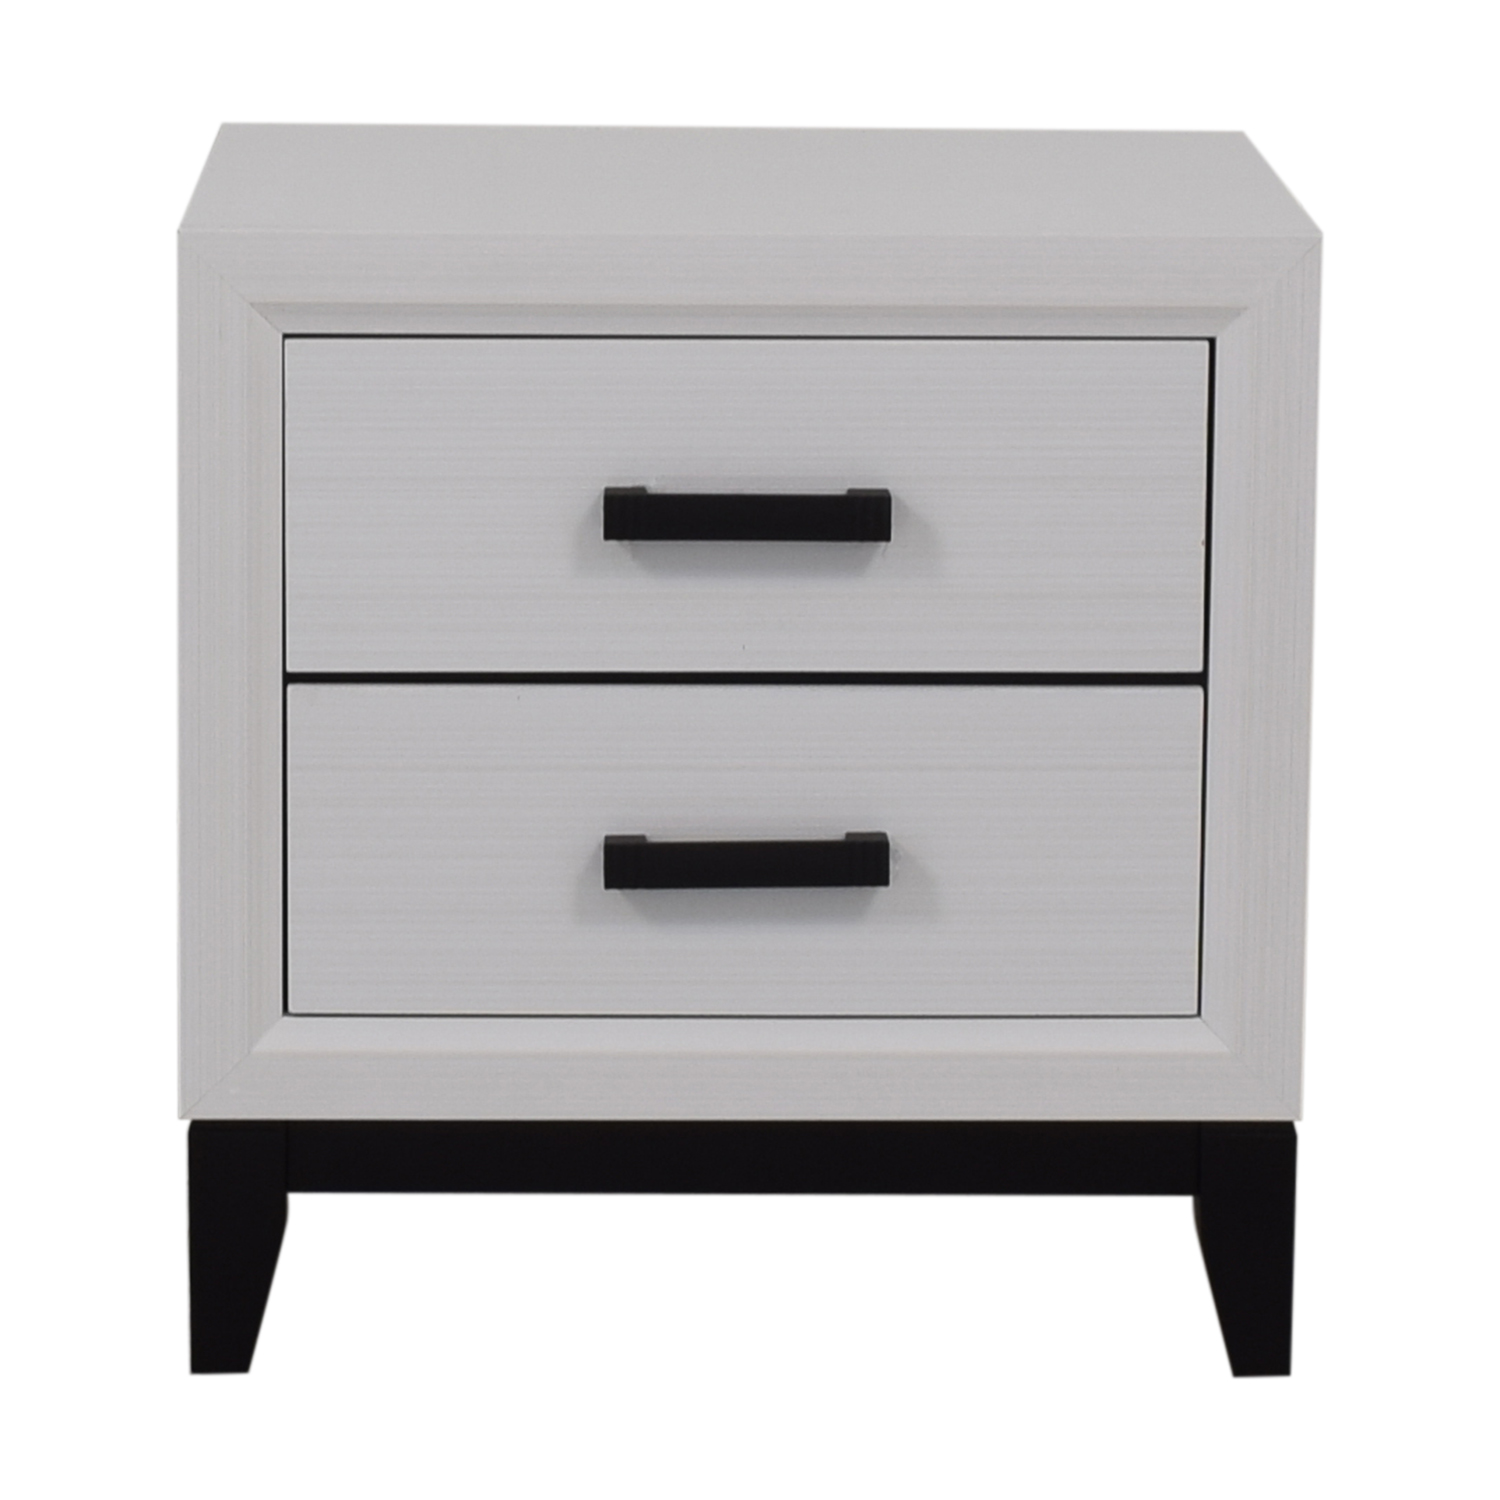 off modern white two drawer nightstand tables grey bedroom end leons stoves rustic sofa table ideas ethan allen kids set inch wide console pallet living room layout loveseat